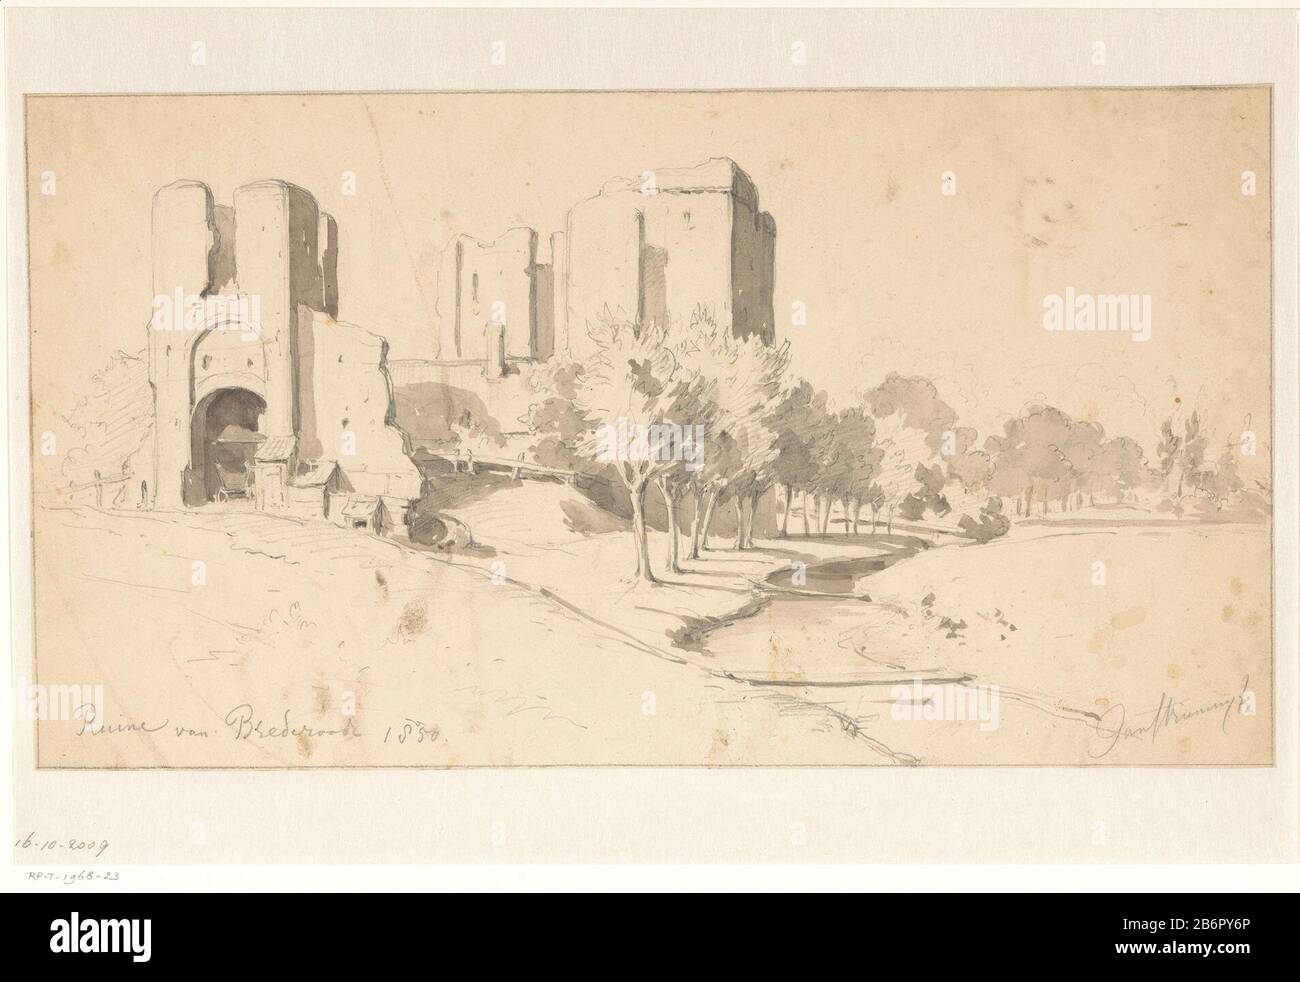 https://c8.alamy.com/comp/2B6PY6P/view-of-the-ruins-of-brederode-object-type-drawing-object-number-rp-t-1968-23-manufacturer-artist-jan-striening-dating-1850-physical-features-brush-in-gray-pencil-material-paper-pencil-technique-brush-dimensions-h-221-mm-w-401-mm-subject-ruin-of-a-building-architecture-reversals-of-historical-buildings-sites-streets-etc-brederode-where-ruin-of-castle-brederode-2B6PY6P.jpg